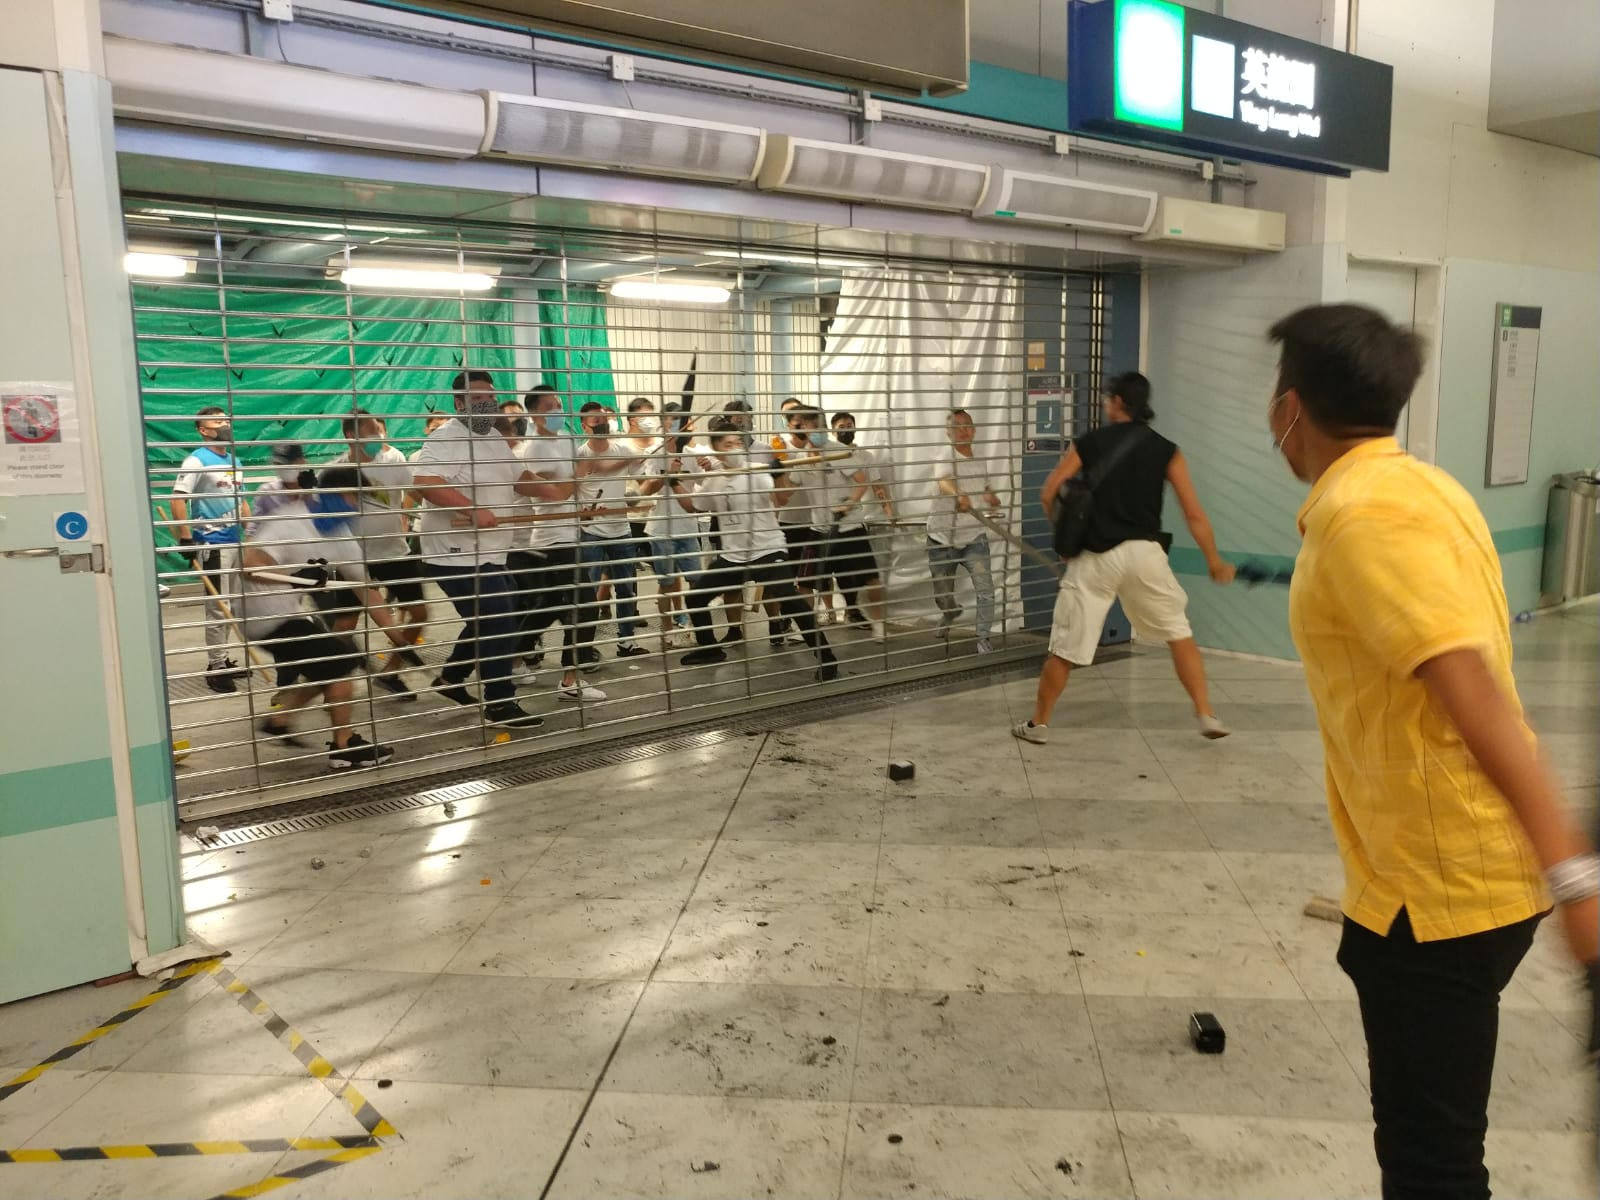 Violence broke out at Yuen Long MTR station on the night of July 21, 2019. Photo: Handout